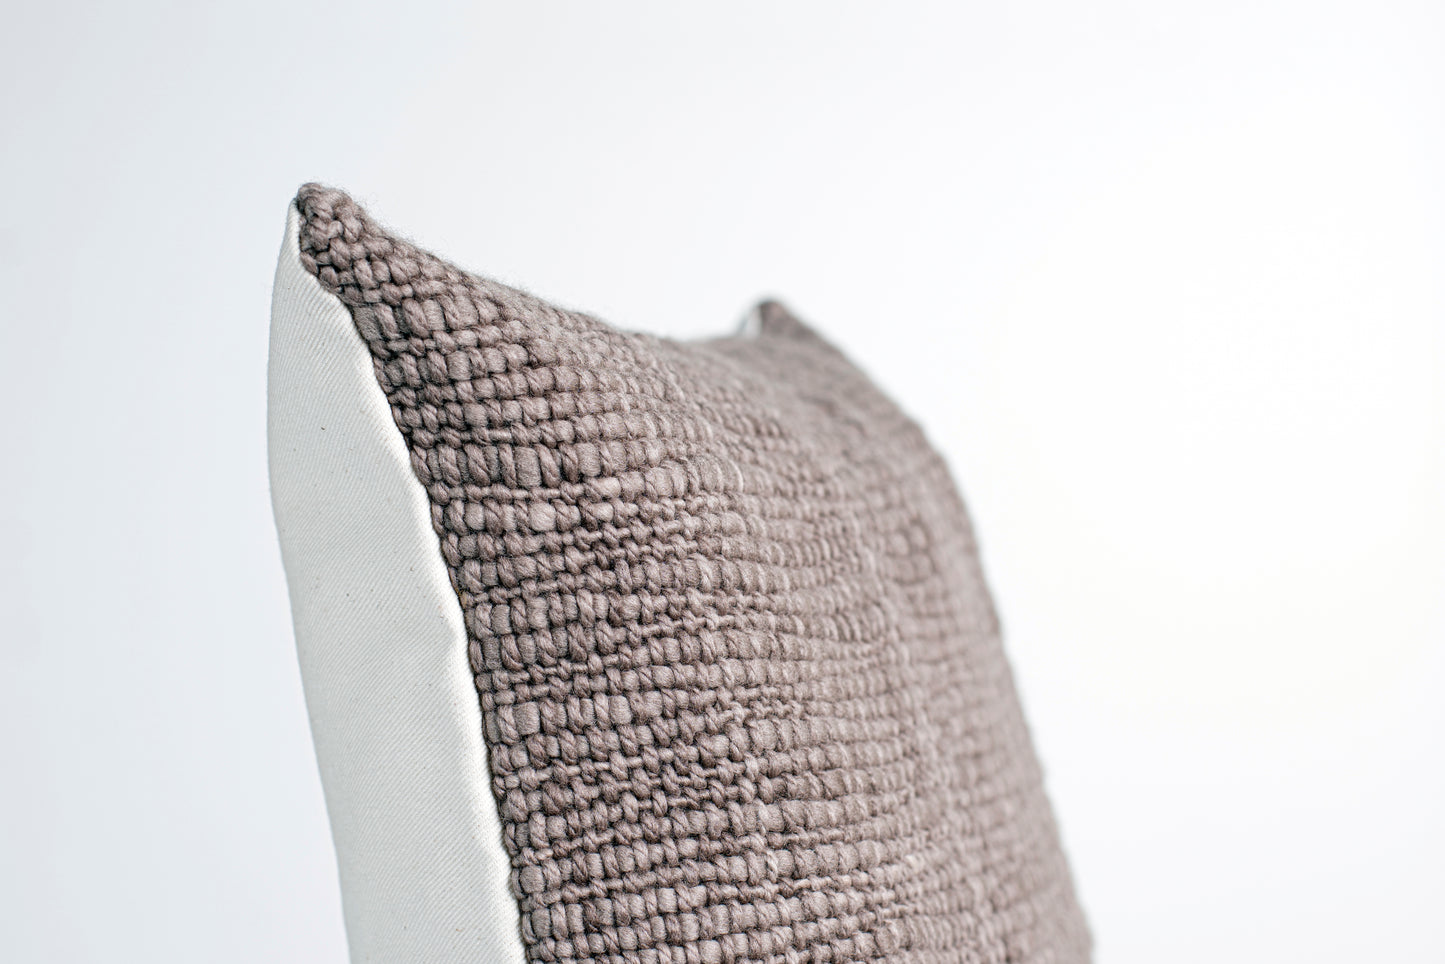 Handwoven Cushion Cover in Taupe Niebla 18x18